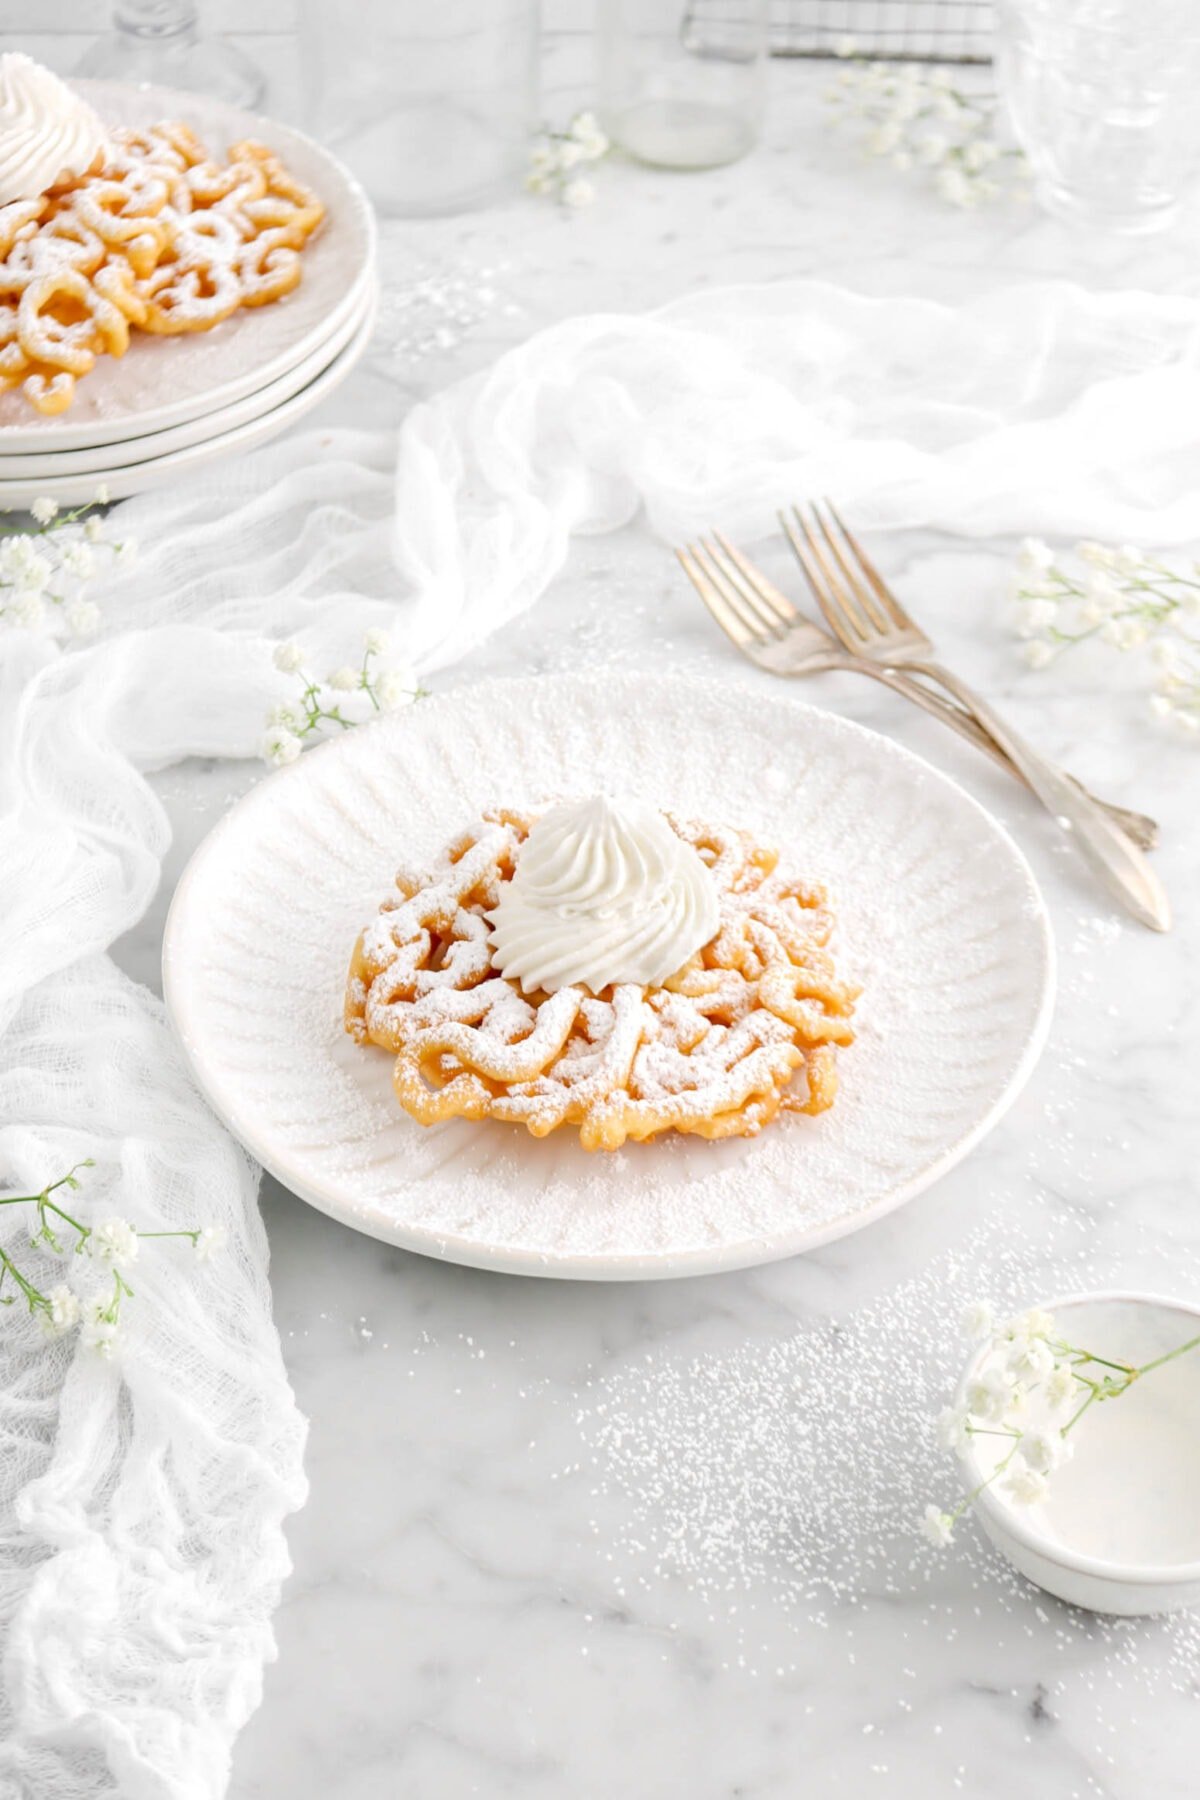 angled phto of funnel cake on white plate with powdered sugar and whipped cream on top, white cheese cloth behind, two forks, and flowers around